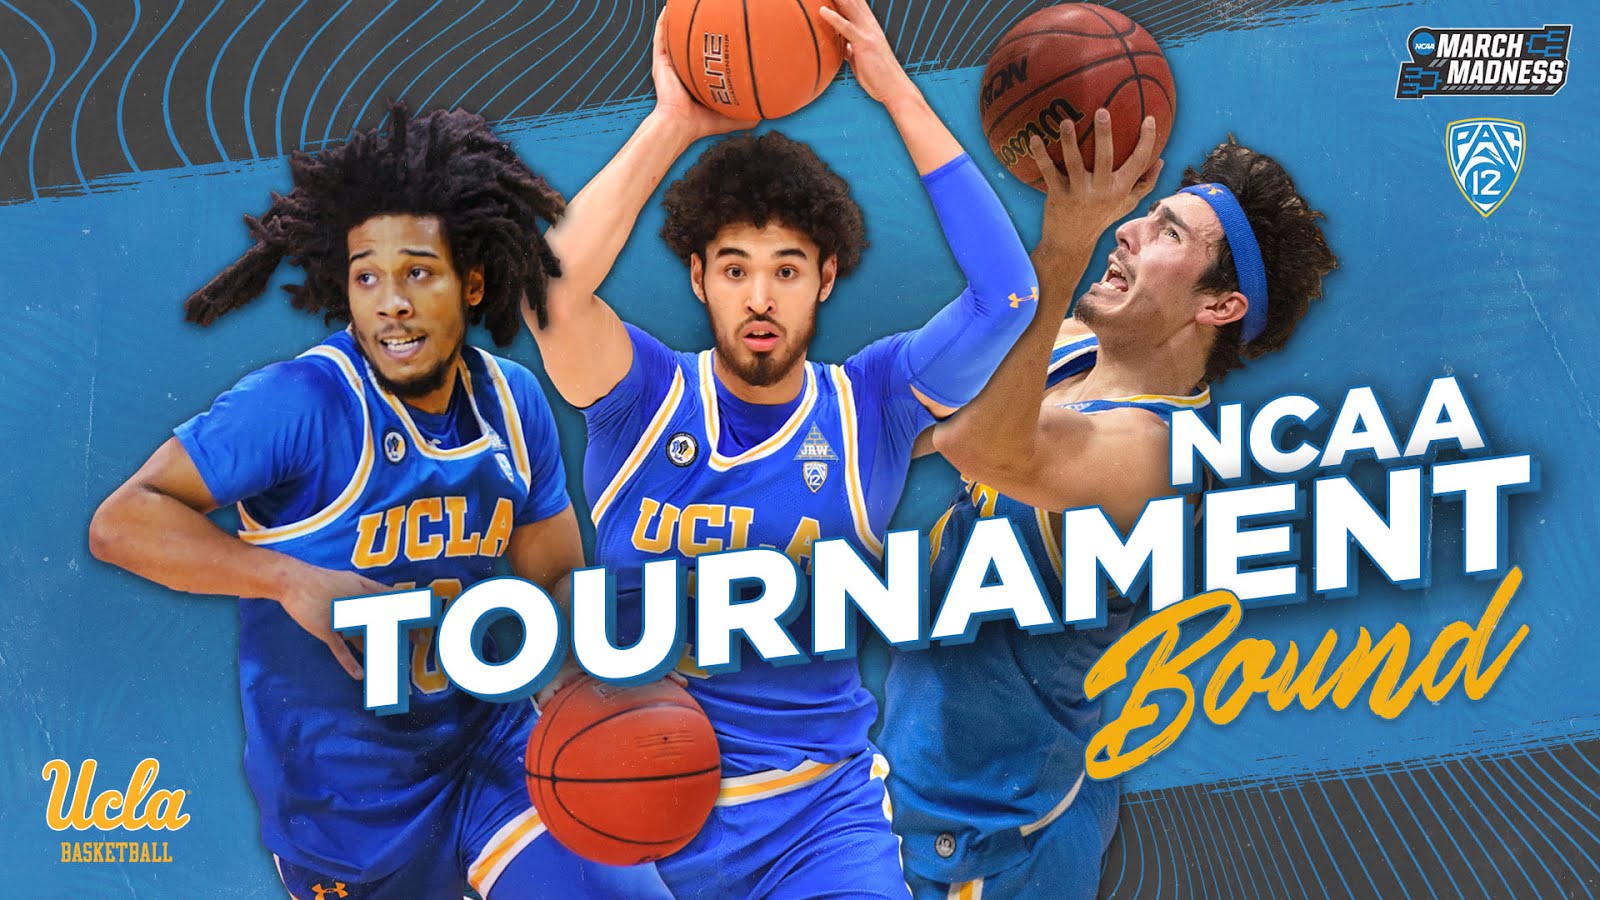 March Madness 2021!!! LET'S GO, UCLA BRUINS!!!